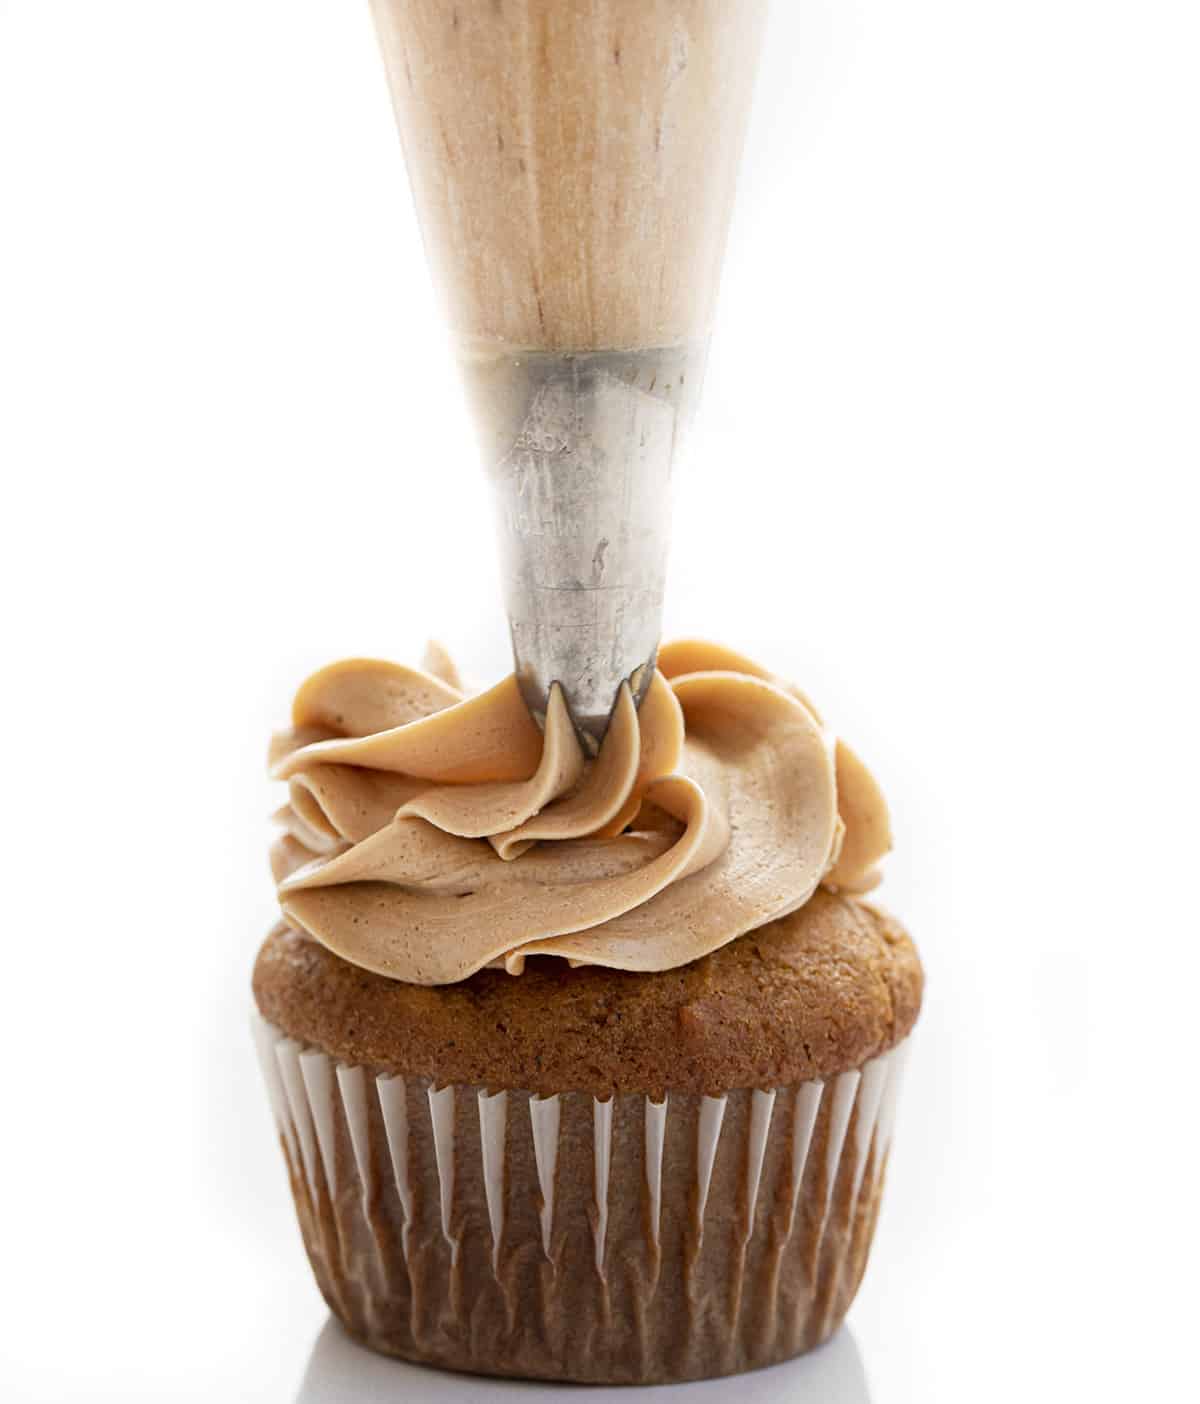 Piping Coffee Frosting onto a Pumpkin Spice Latte Cupcake. Cupcakes, Baking, Decorated Cupcakes, Frosted Cupcakes, Pumpkin Spice Cupcakes, Coffee Frosting, Dessert, Holiday Desserts, Christmas Dessert, Thanksgiving Desserts, Thanksgiving Cupcakes, Starbucks Cupcakes, i am baker, iambaker